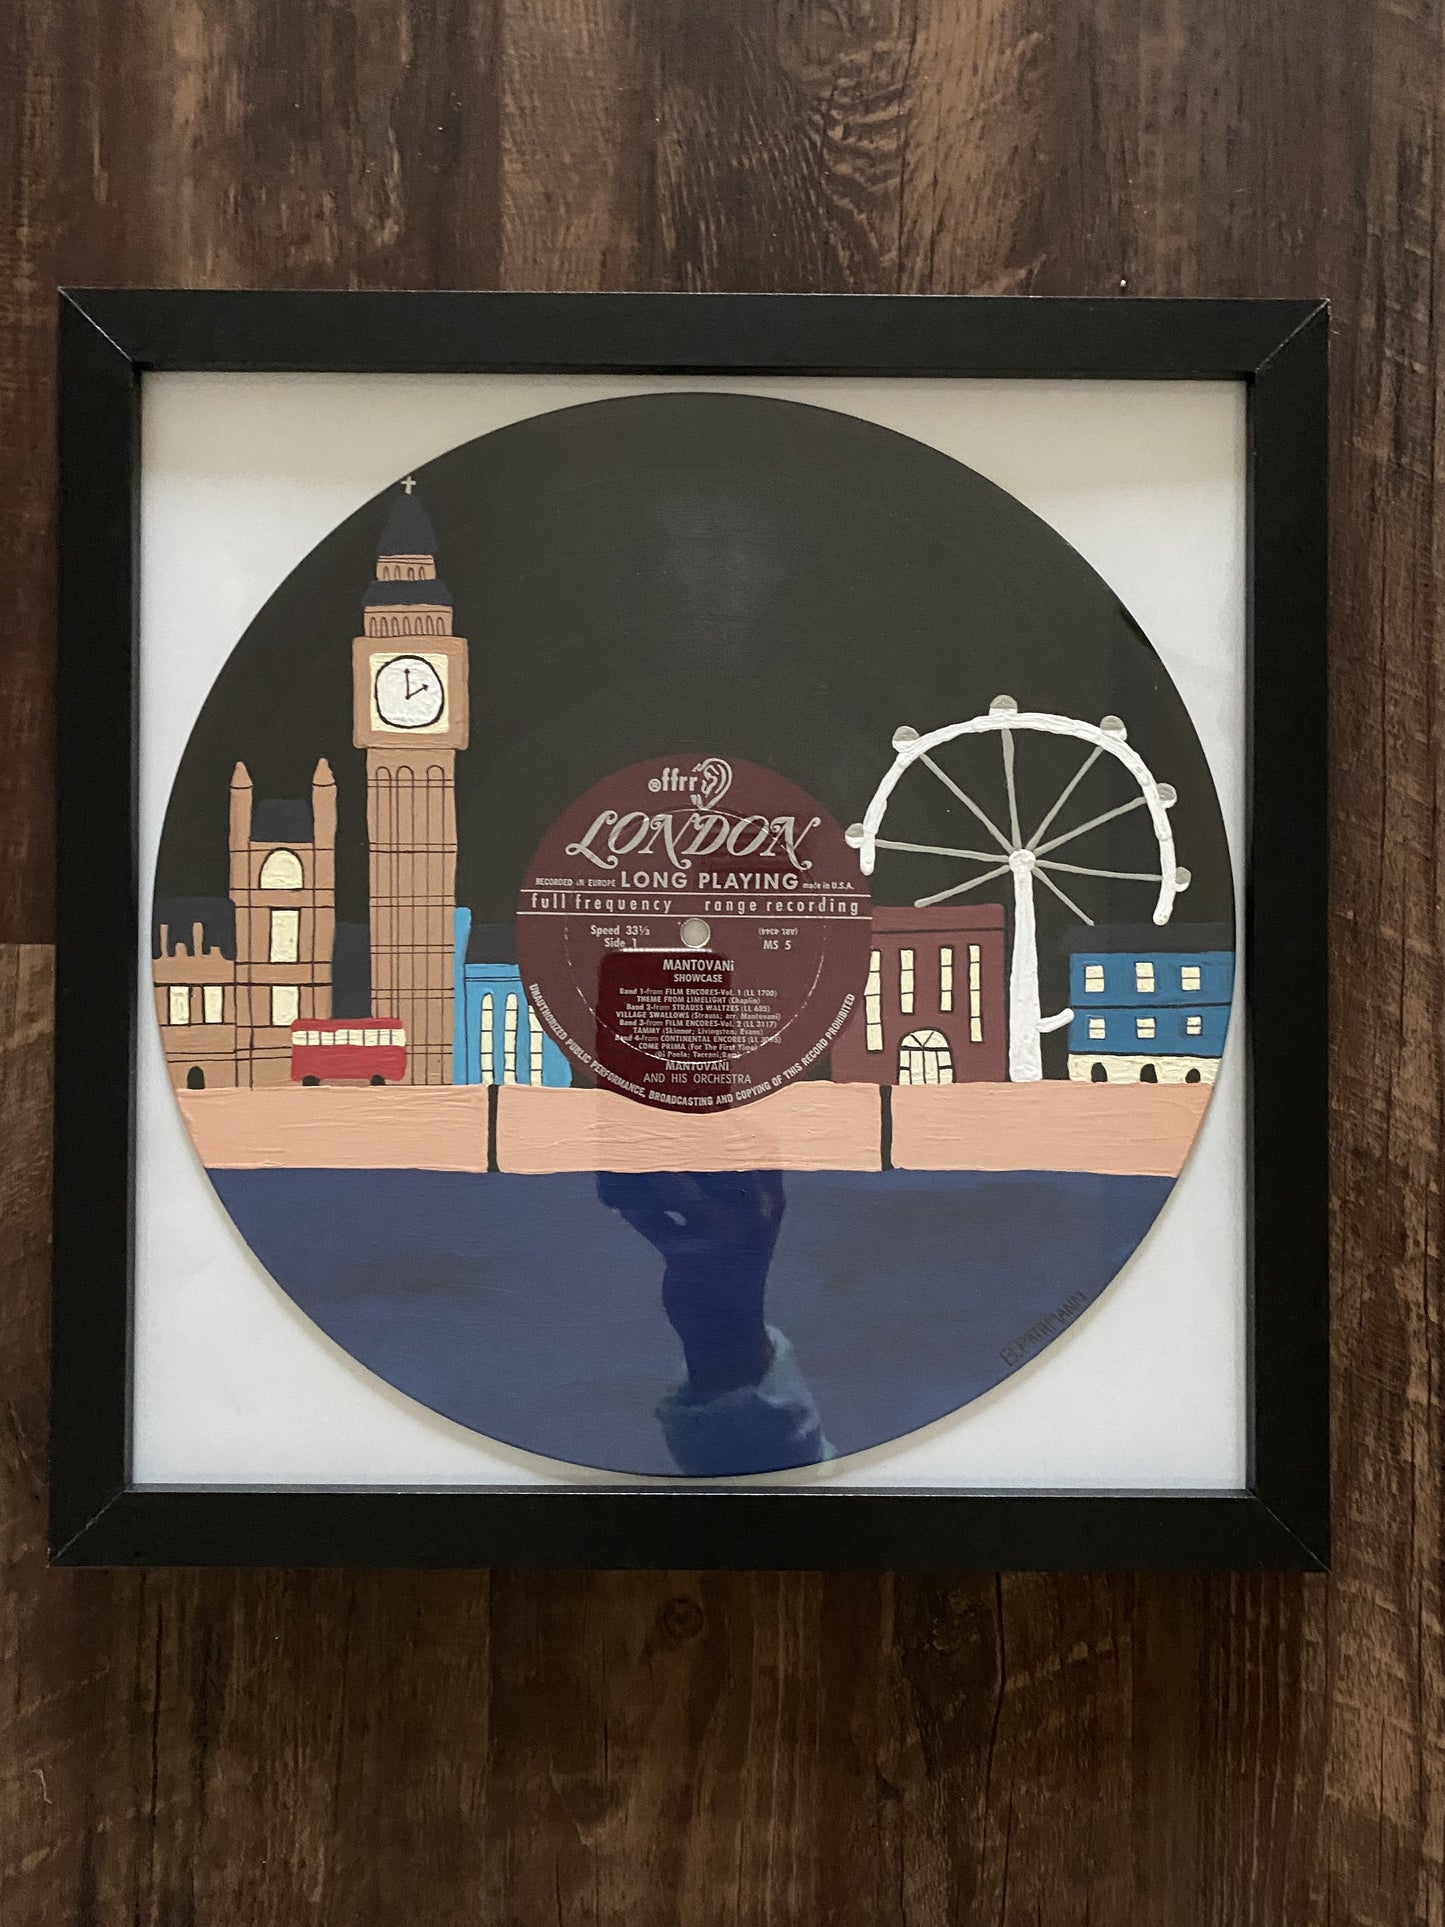 London Calling Record is an acrylic painting of some of the most iconic scenes in London including Big Ben, London Eye, the double-decker bus, and much more.